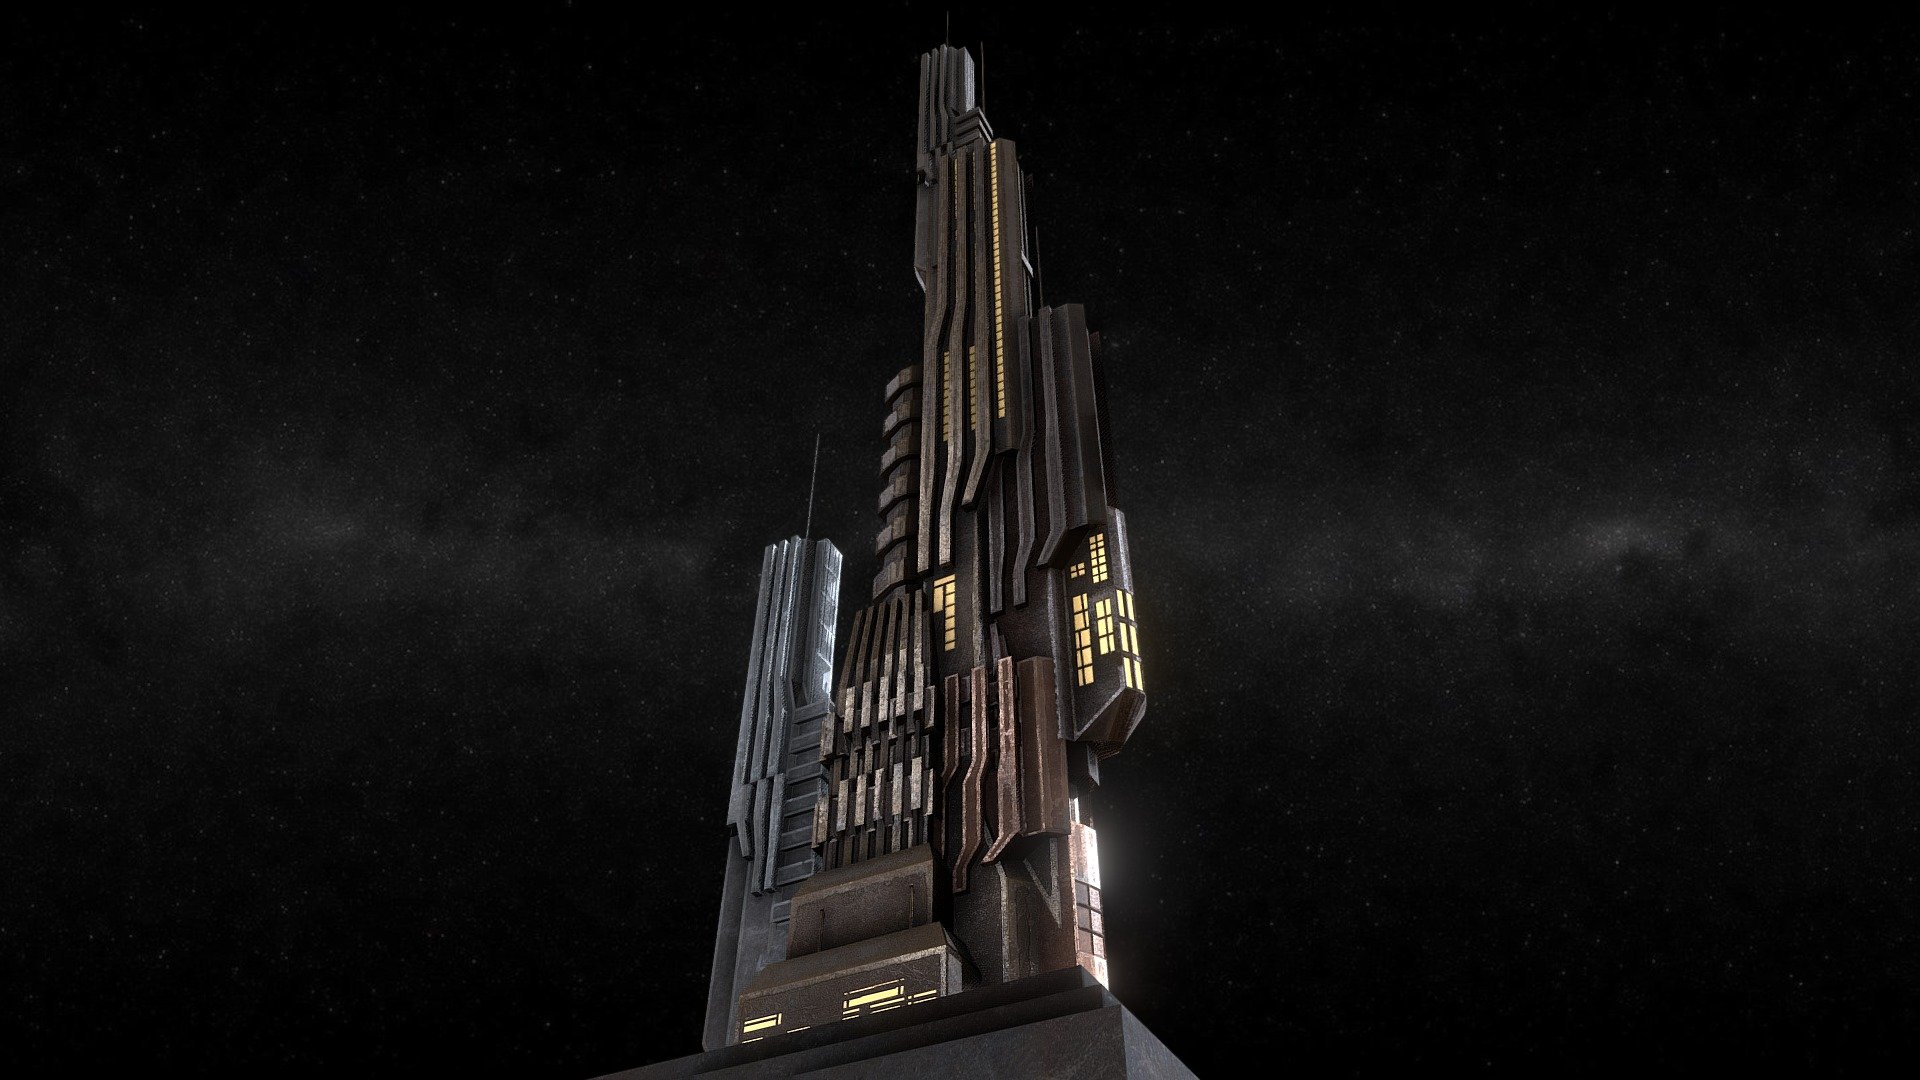 Amstad Digital collaboration between Nick Miller and Cécile Amstad - "old town" Scifi Tower - 3D model by Cécile Amstad (@c.m.a) 3d model